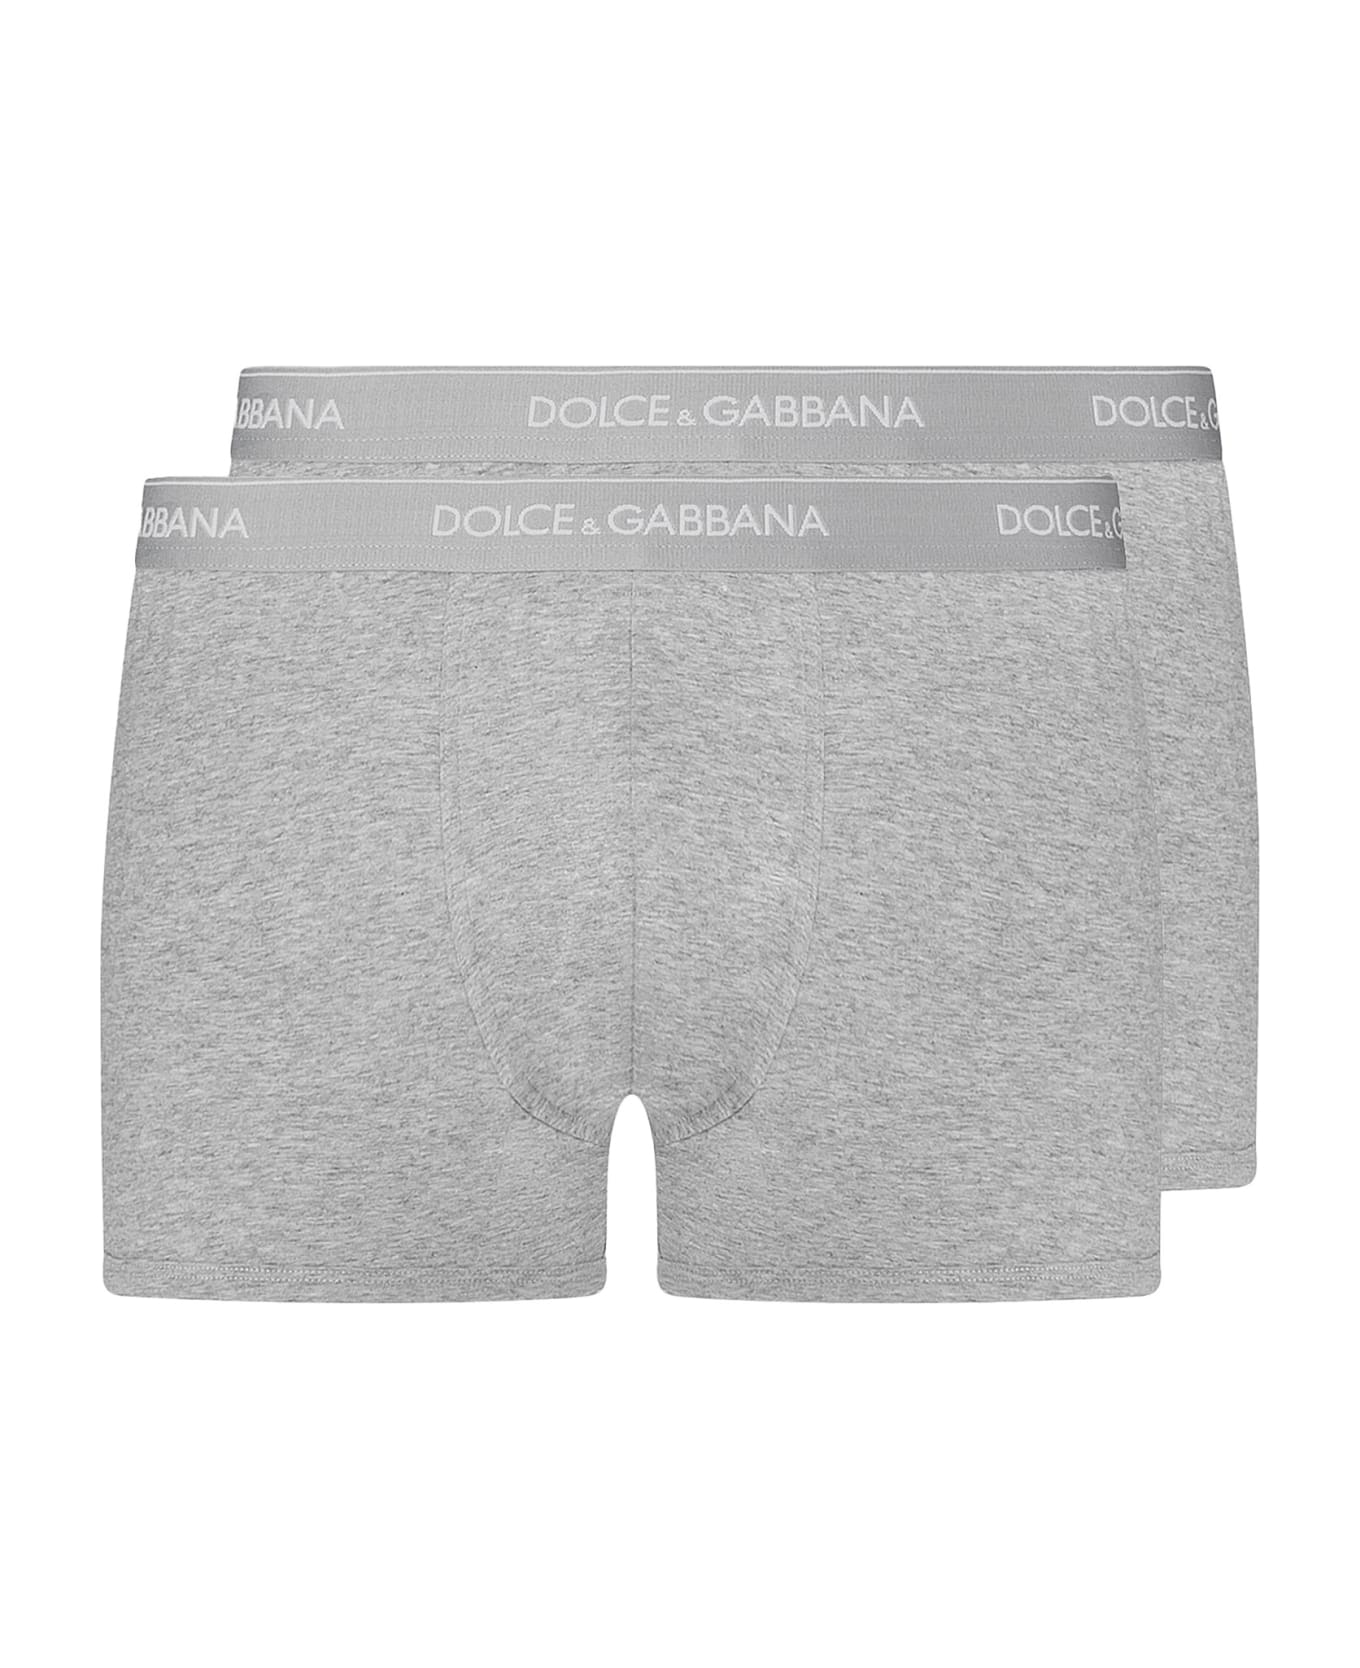 Dolce & Gabbana Pack Of Two Boxers - GREY